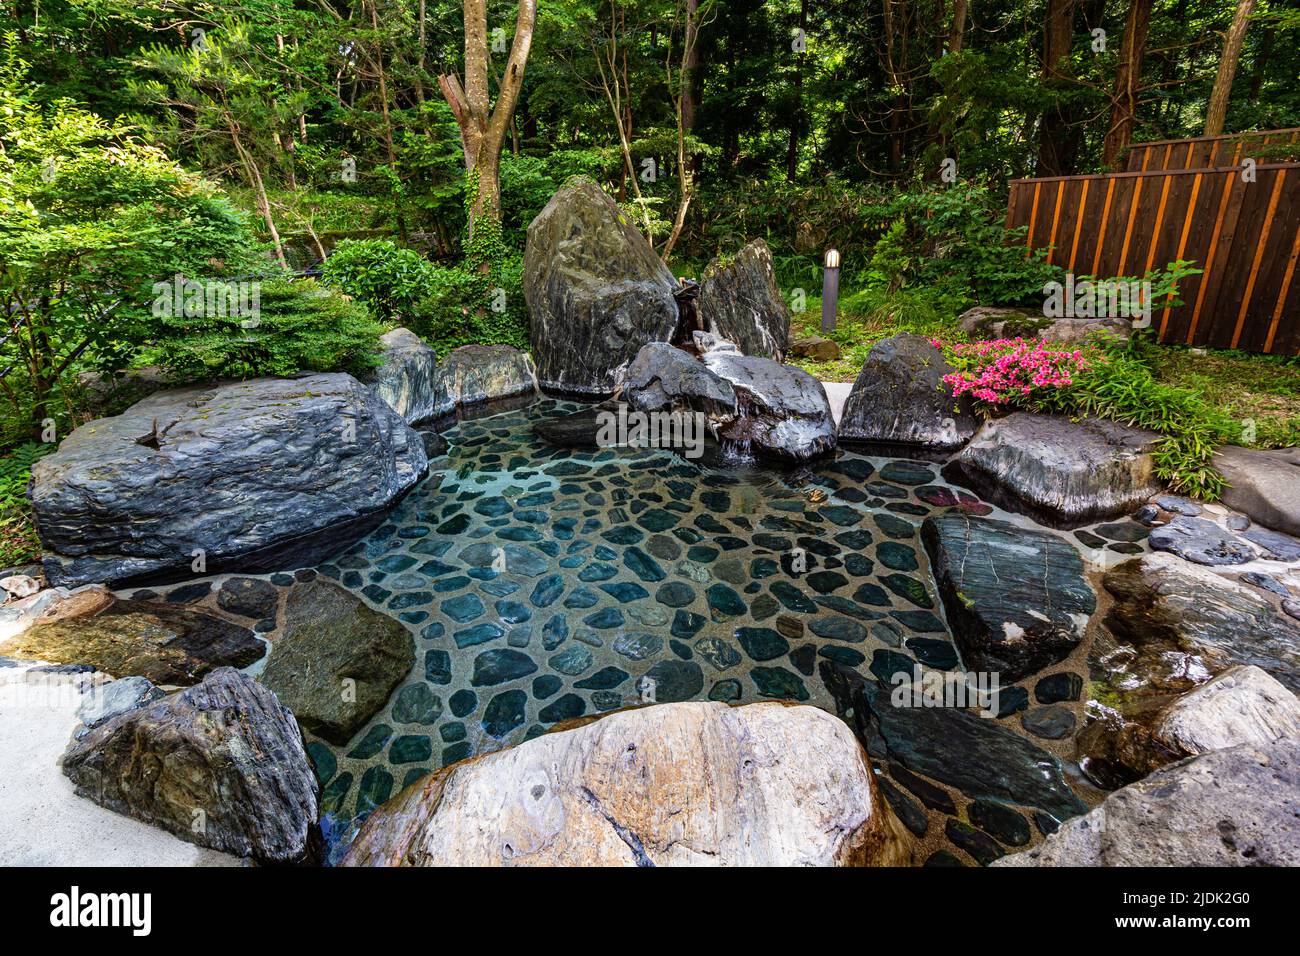 Rotemburo is an open-air hot spring called a 'rotemburo' in Japan. Bathing in a natural atmosphere, among the trees and under open skies is a favorite Stock Photo